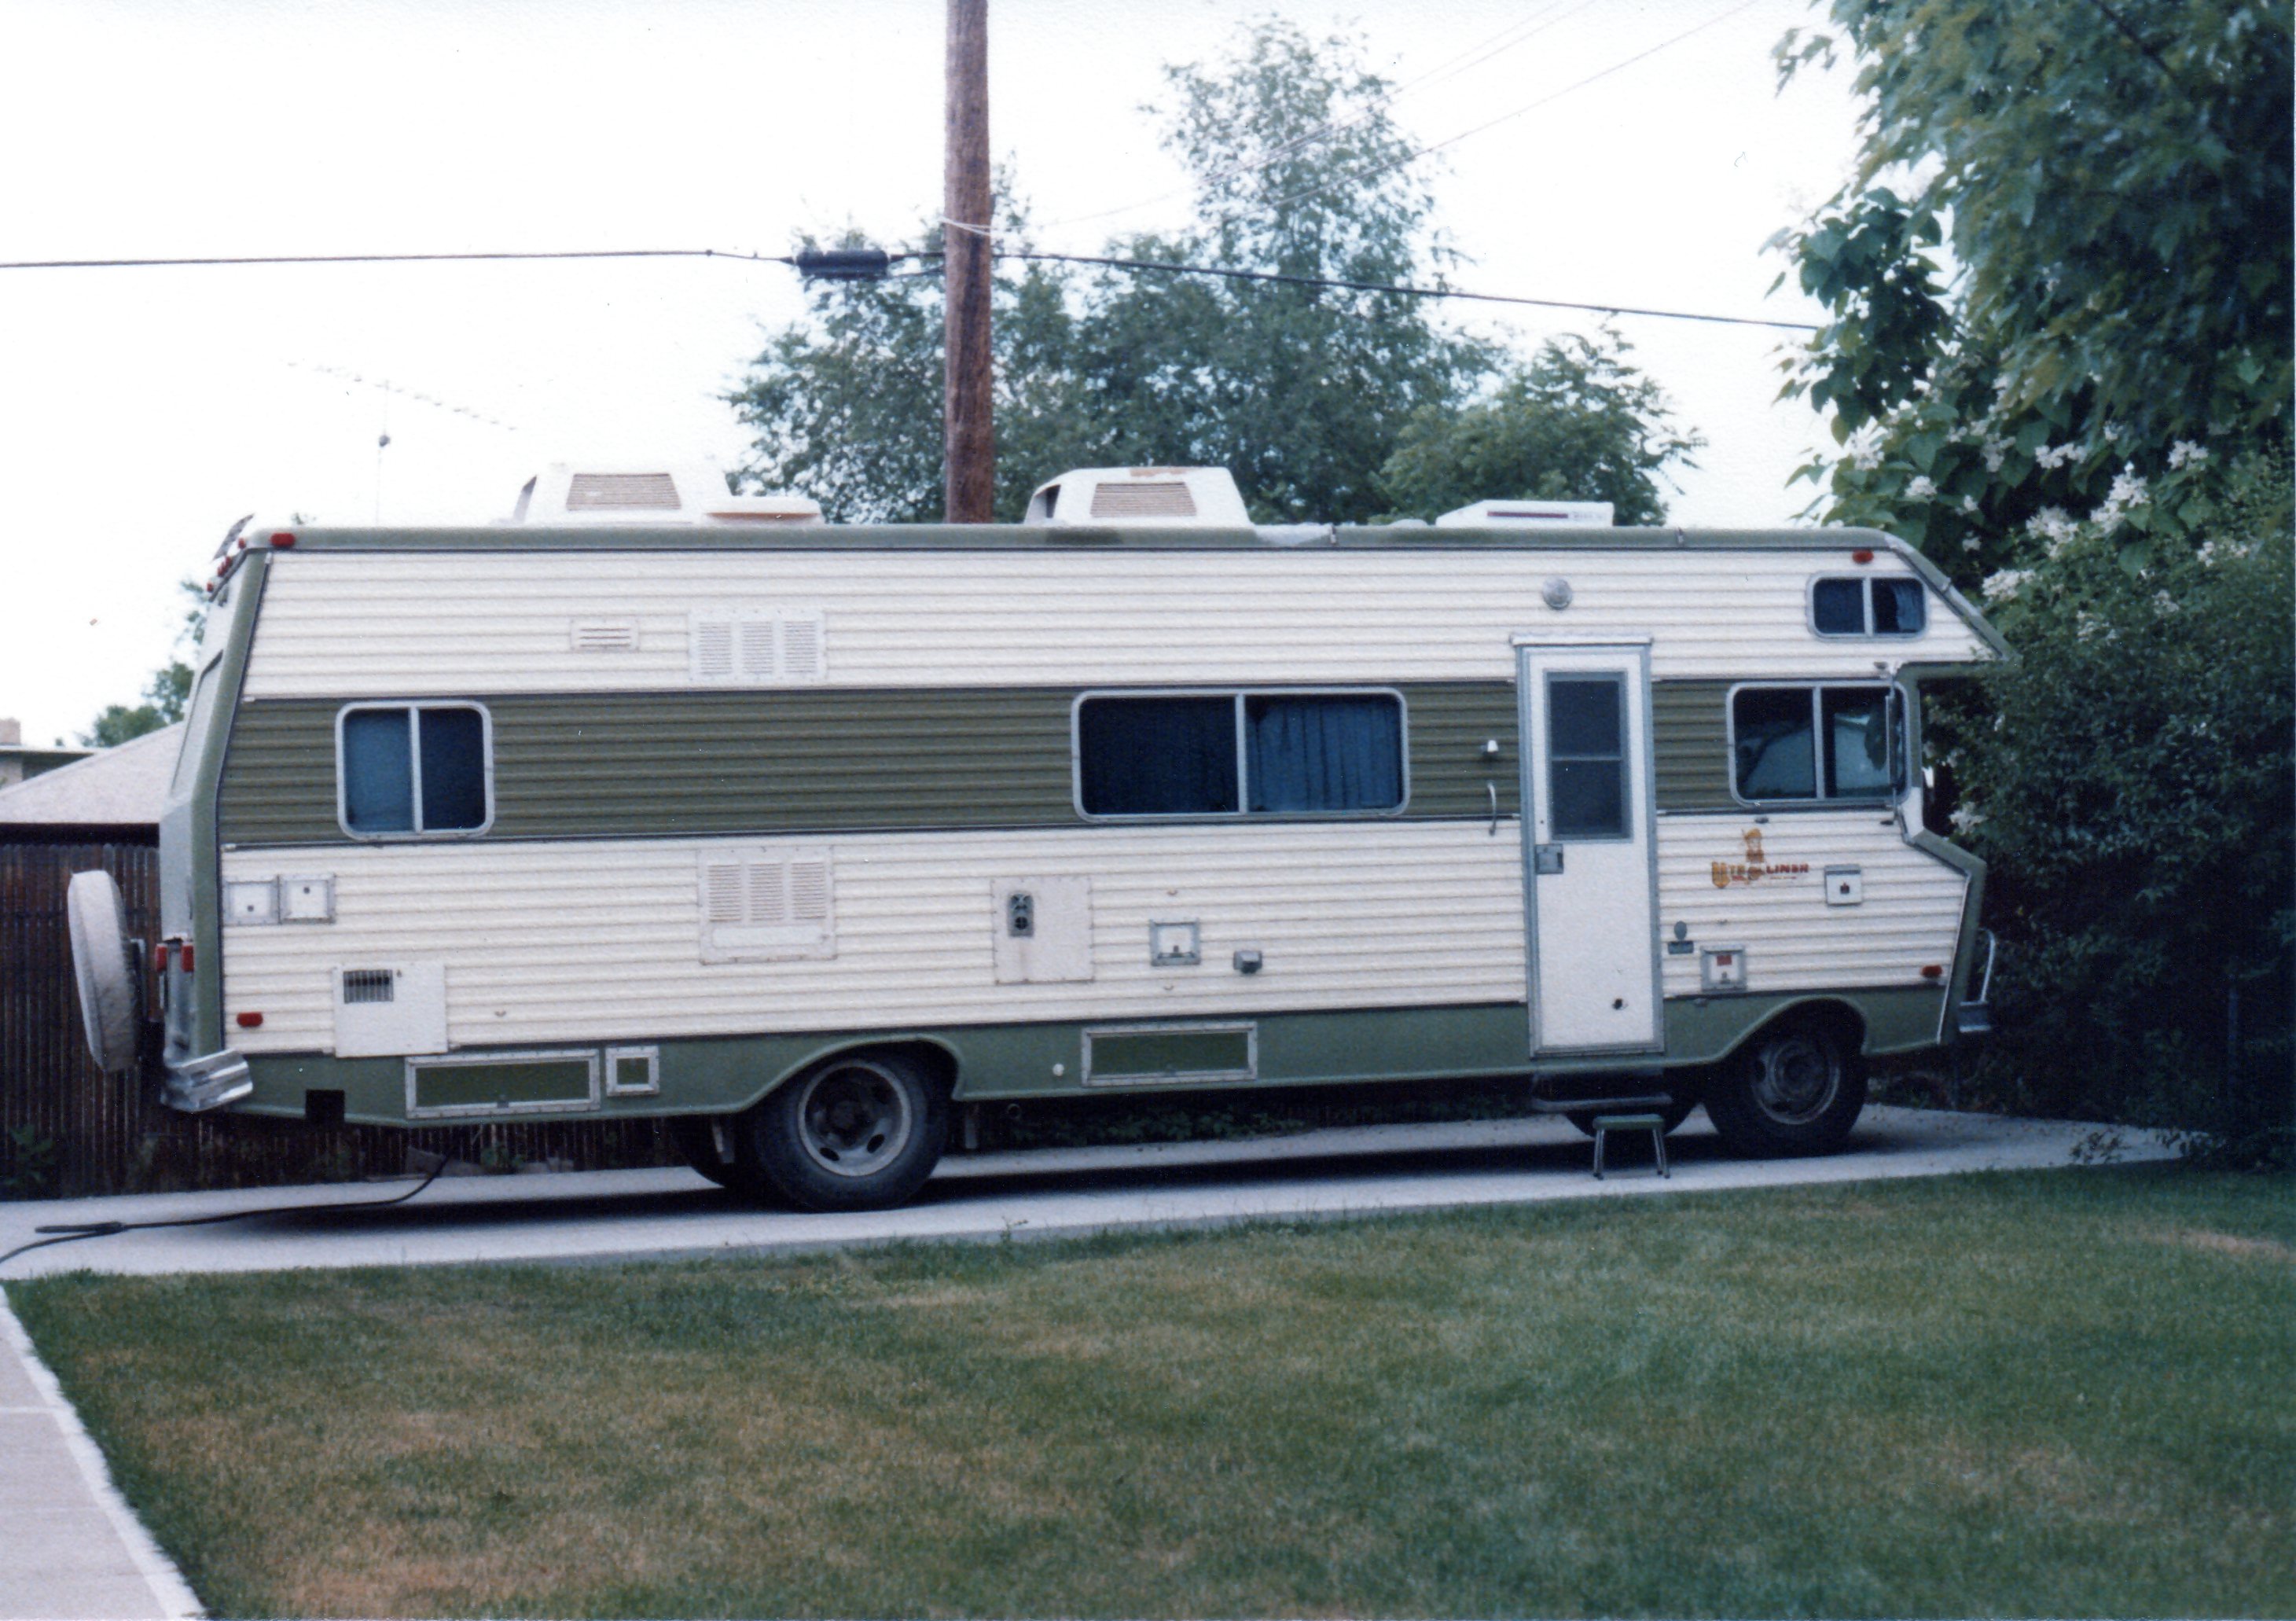 Old motorhome on paved parking pad outside house.